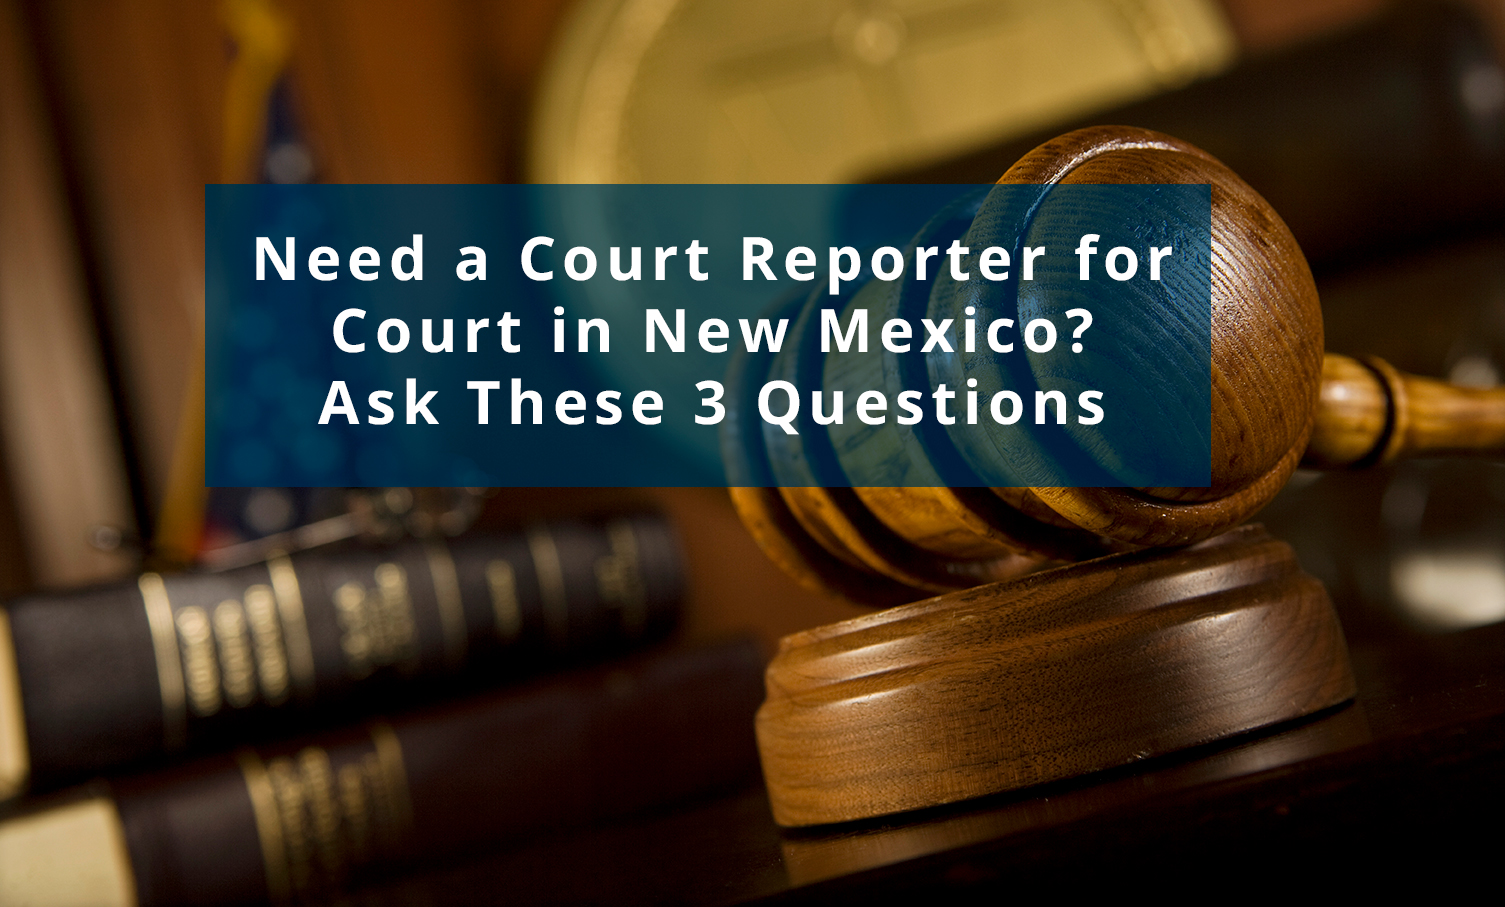 Court Reporter for Court in New Mexico